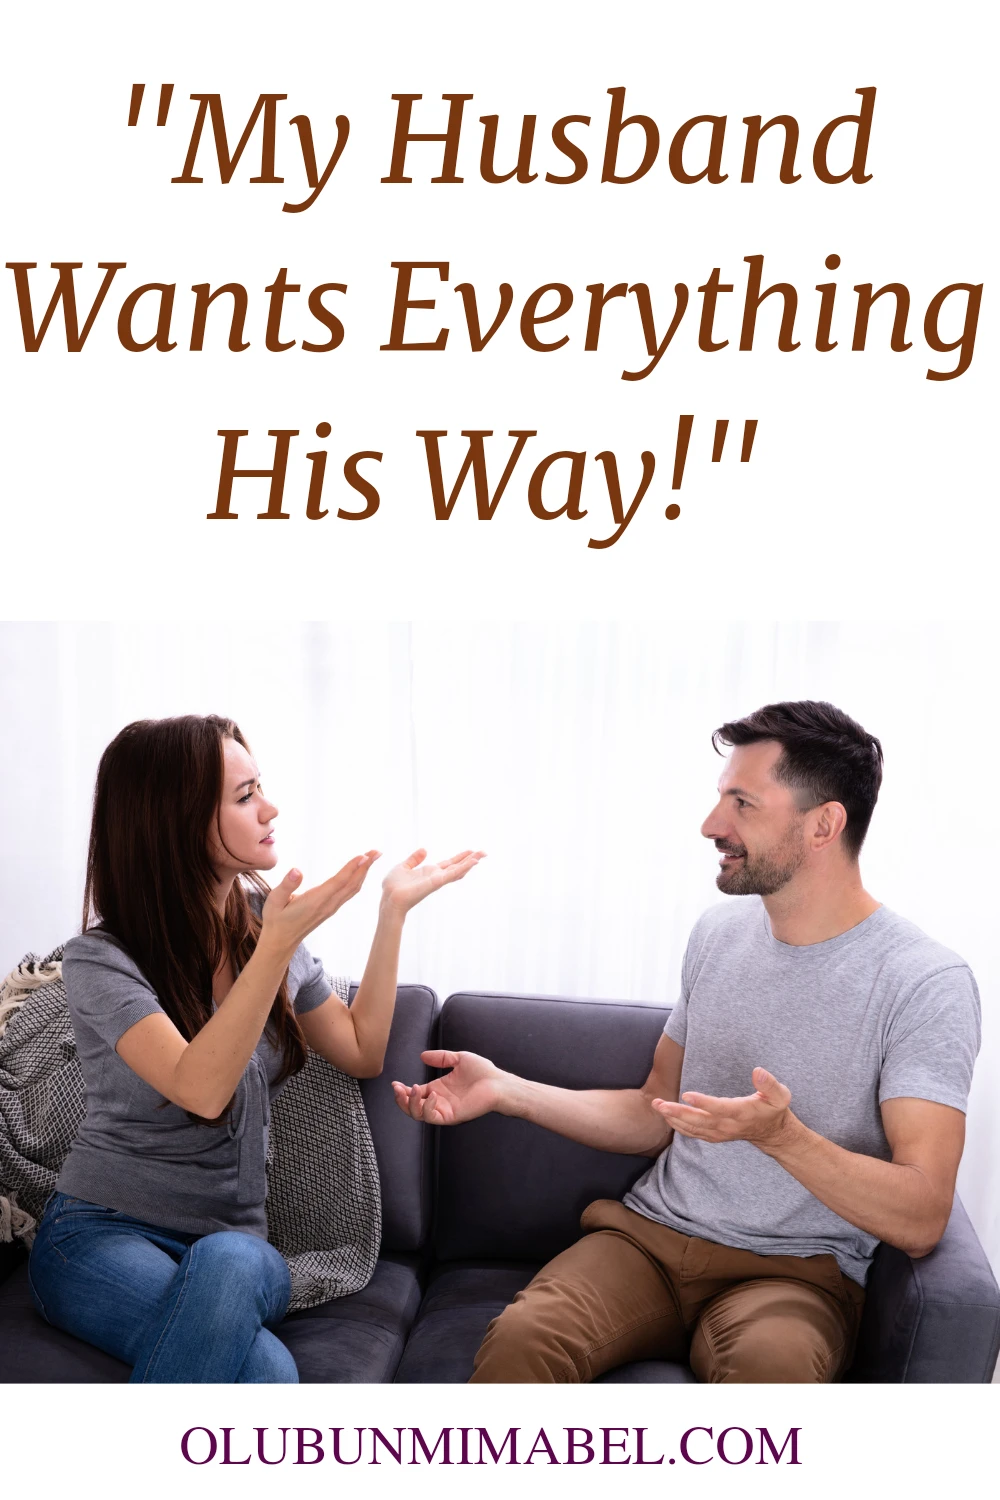 My Husband Wants Everything His Way